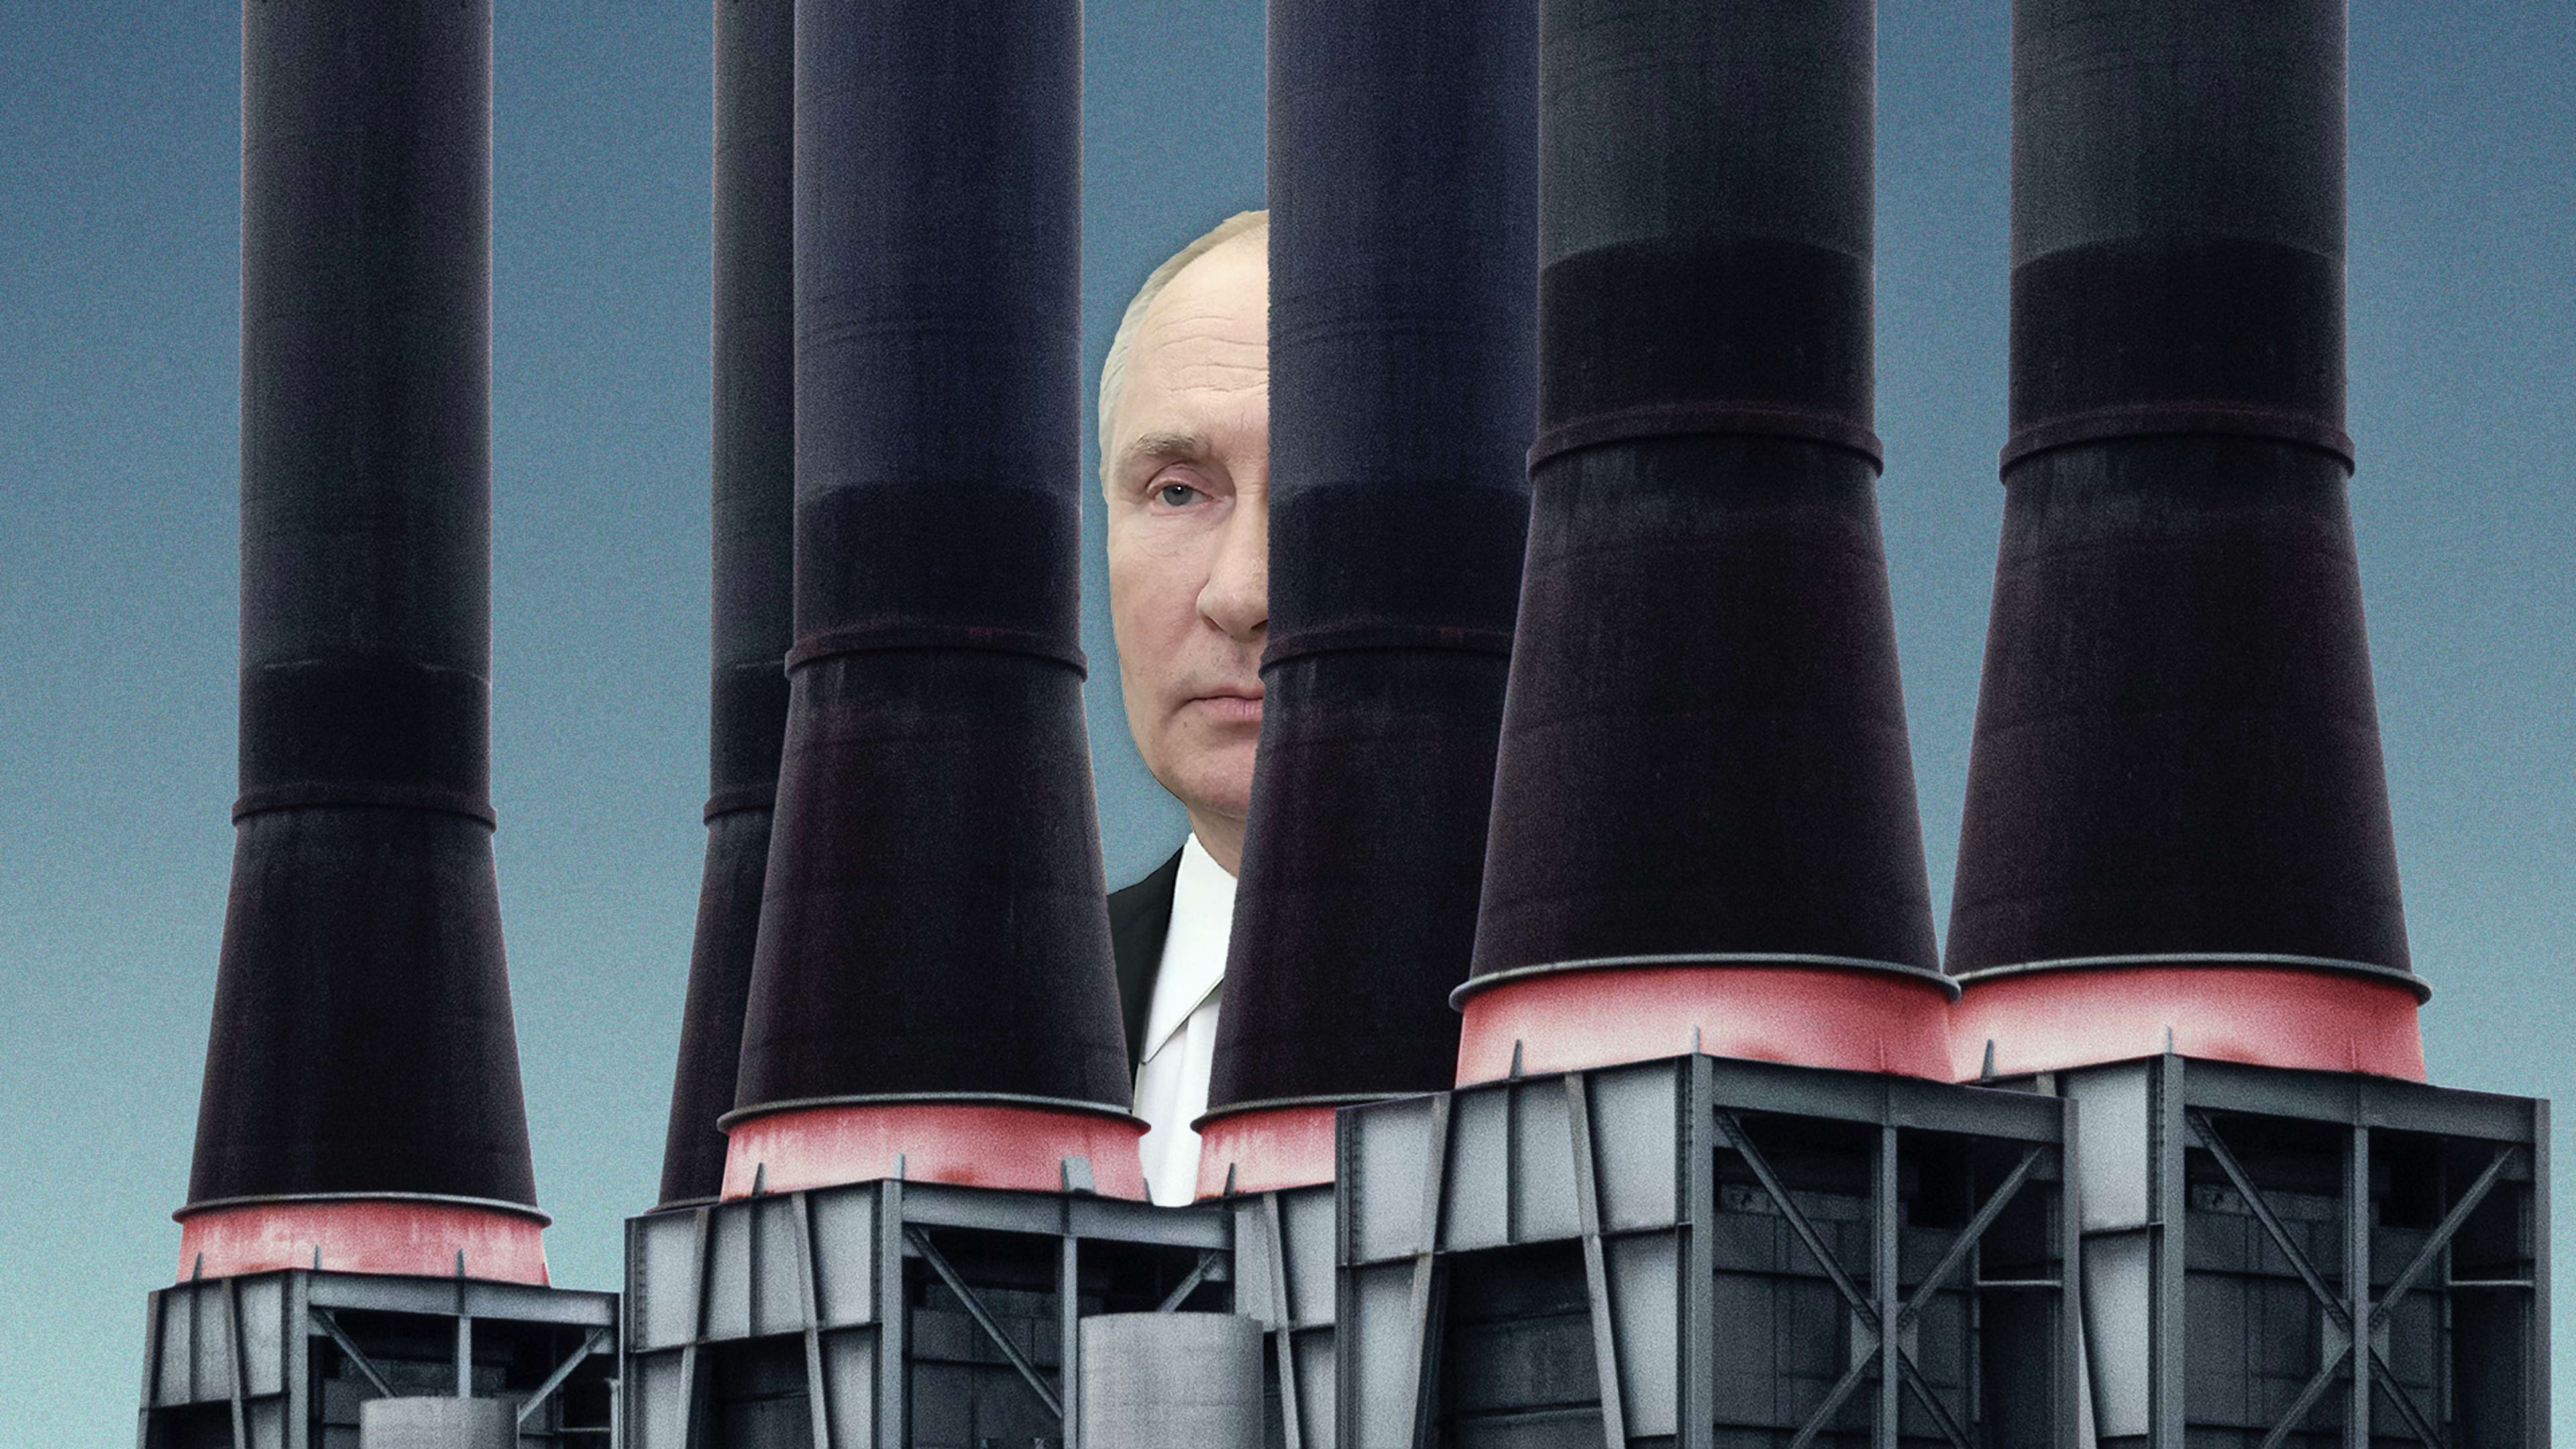 Russia’s weaponization of natural gas could backfire by destroying demand for it